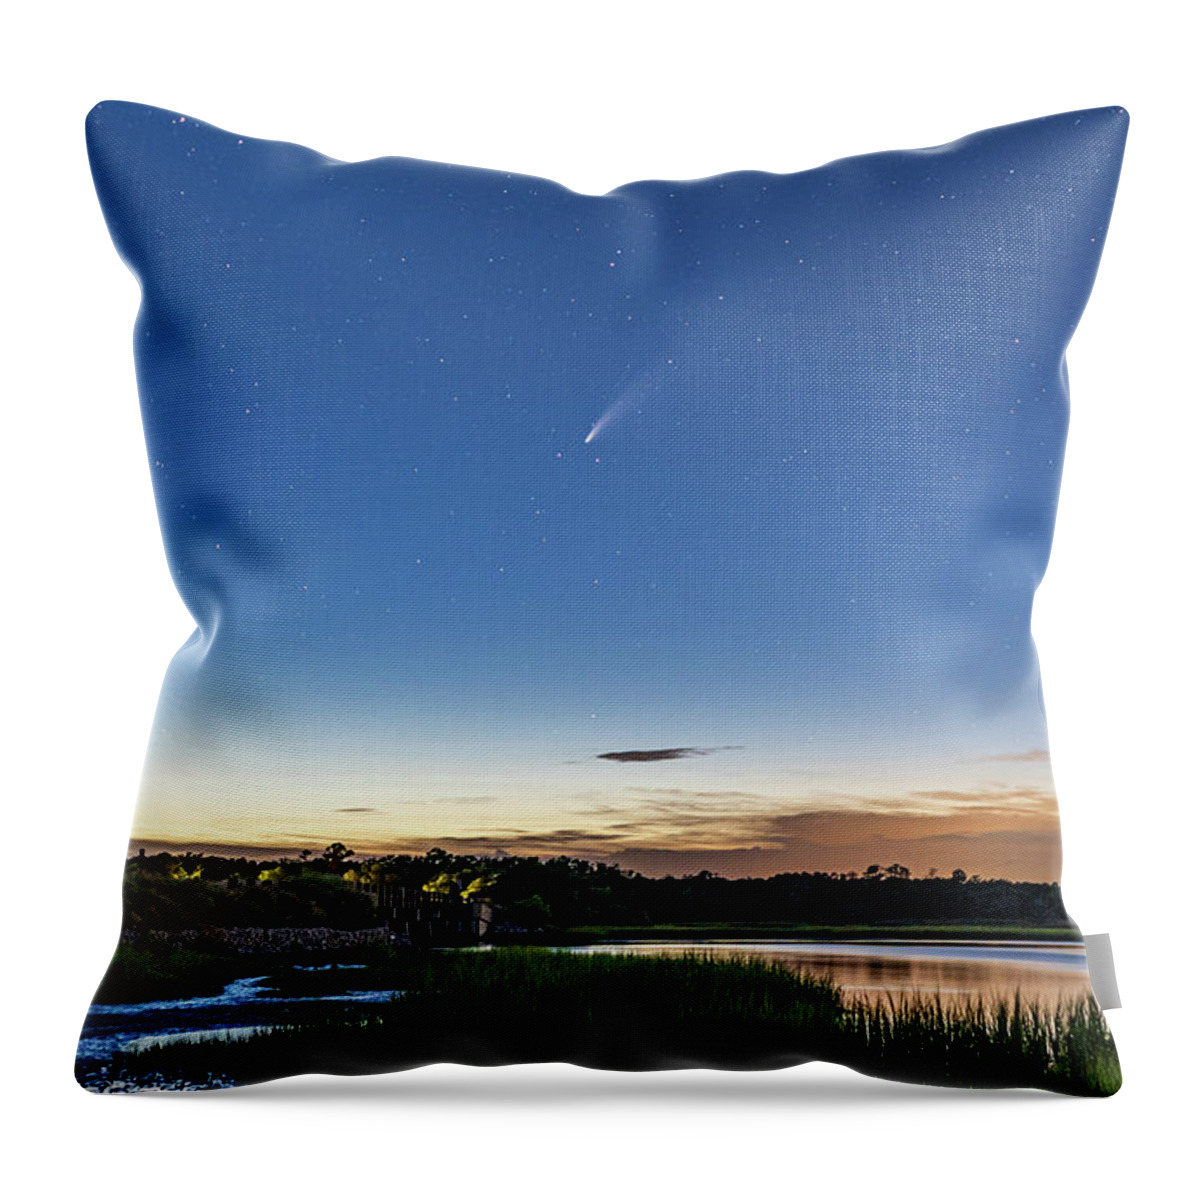 Neowise Throw Pillow featuring the photograph Neowise - Kiawah Island by Jim Miller